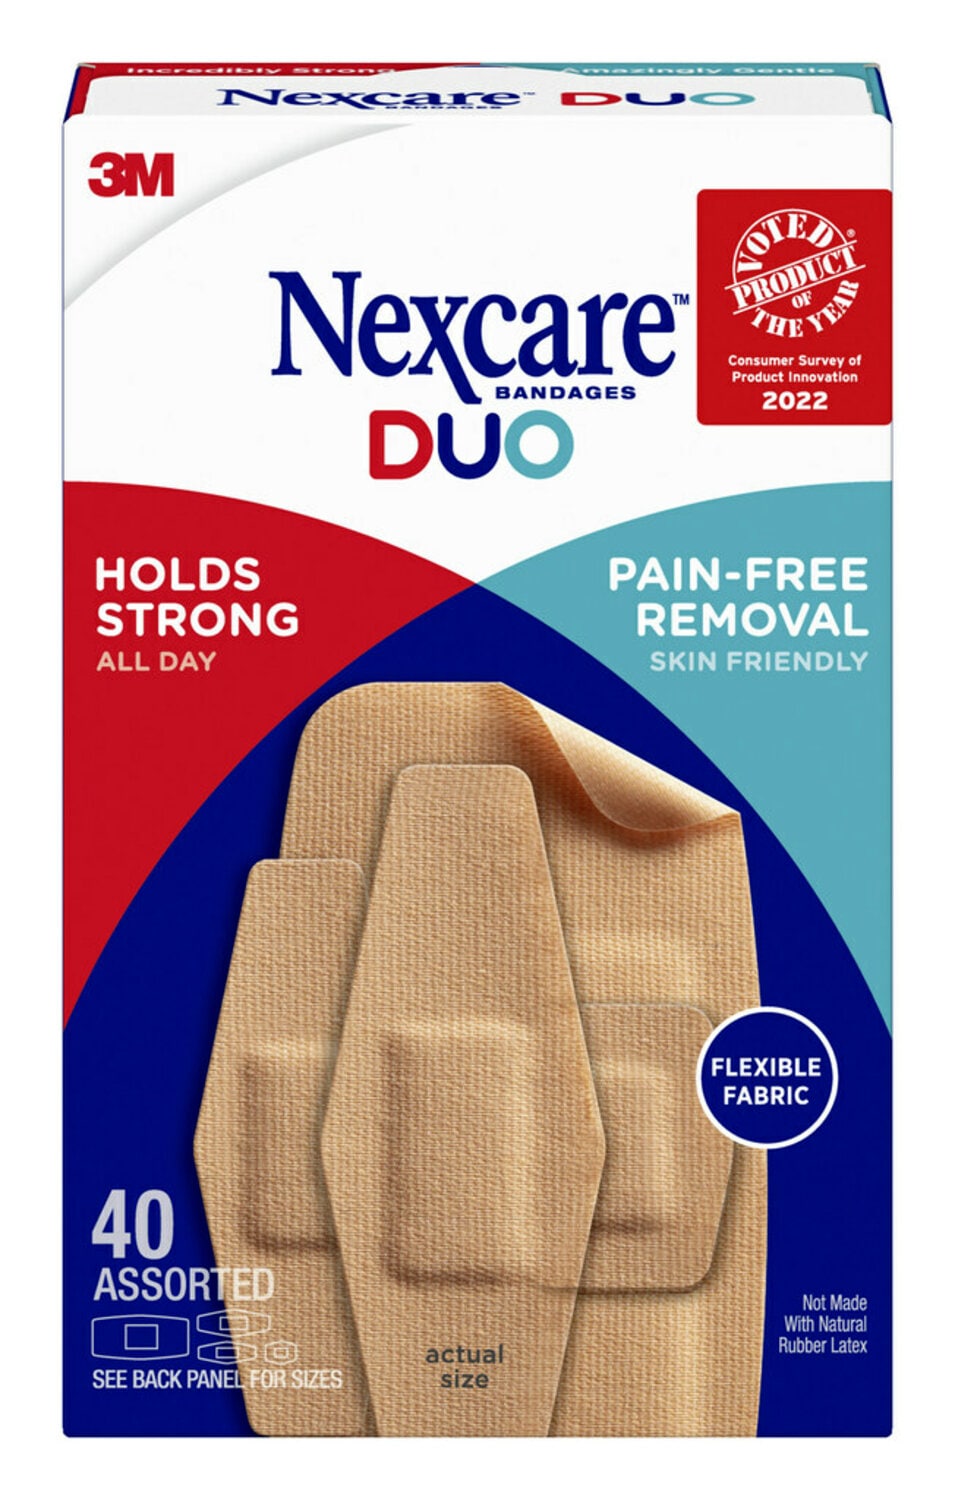 7100241251 - Nexcare DUO Bandages DSA-40, Assorted 40 ct